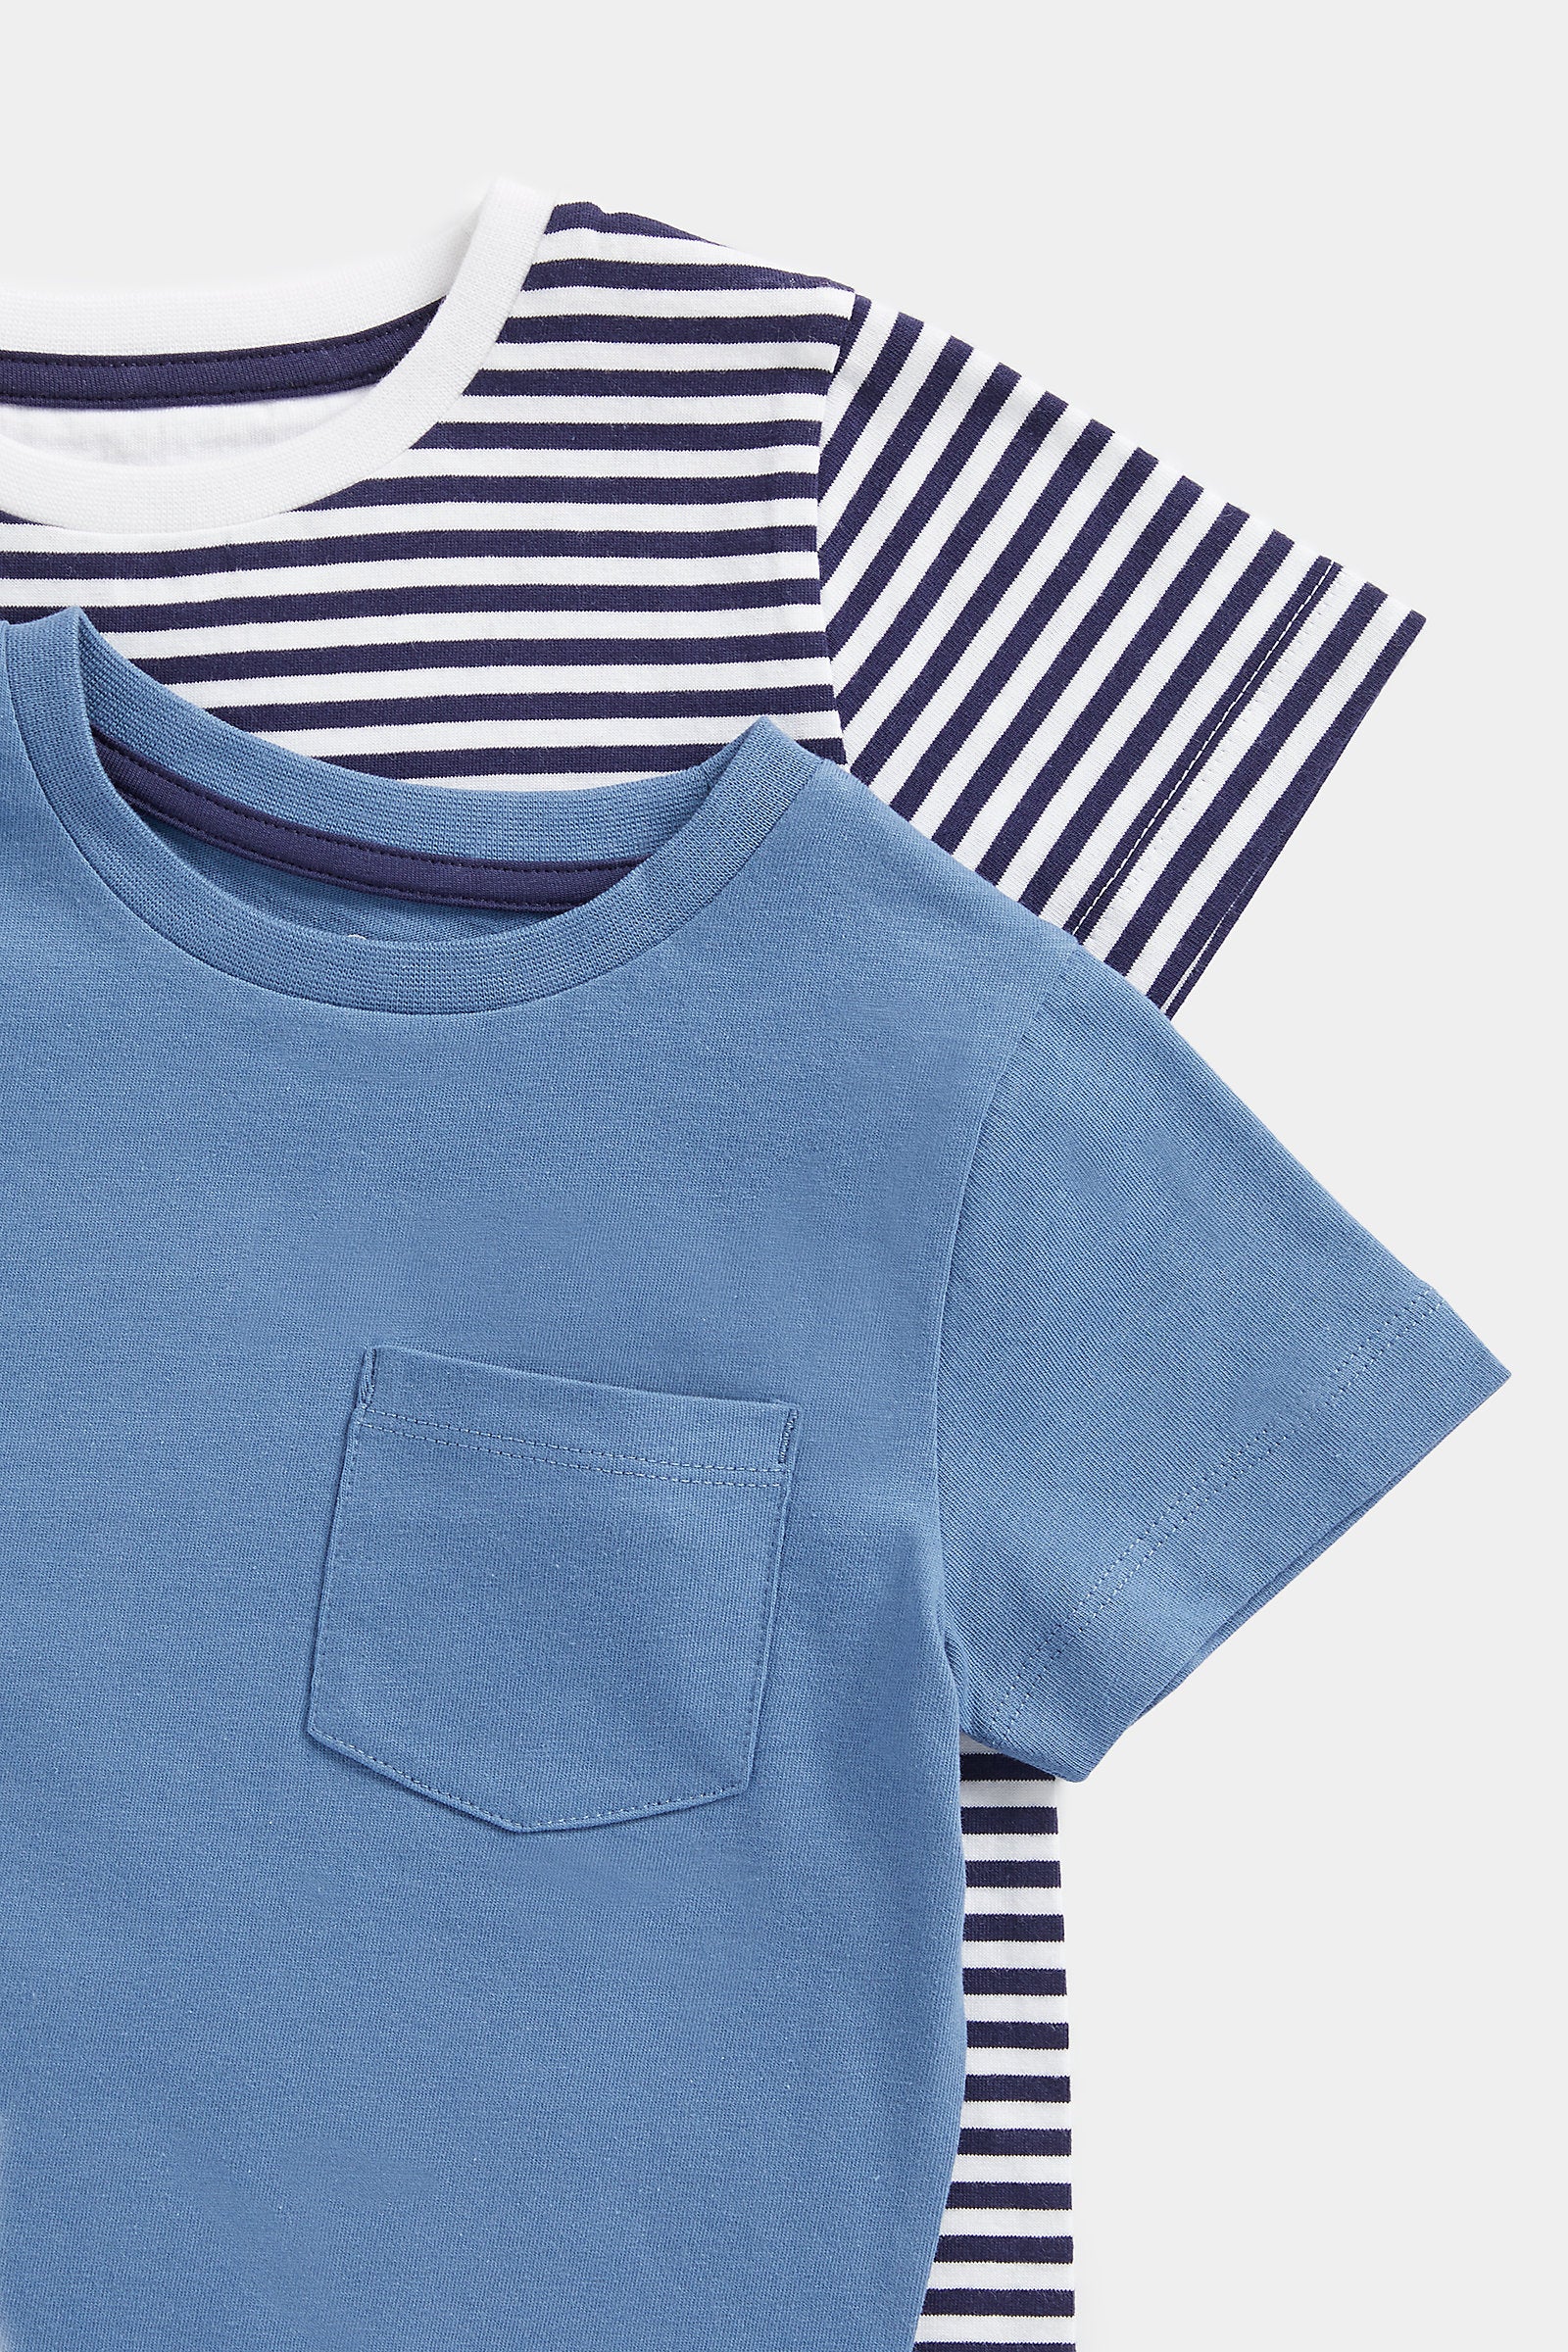 Mothercare Multi T-Shirts - 3 Pack